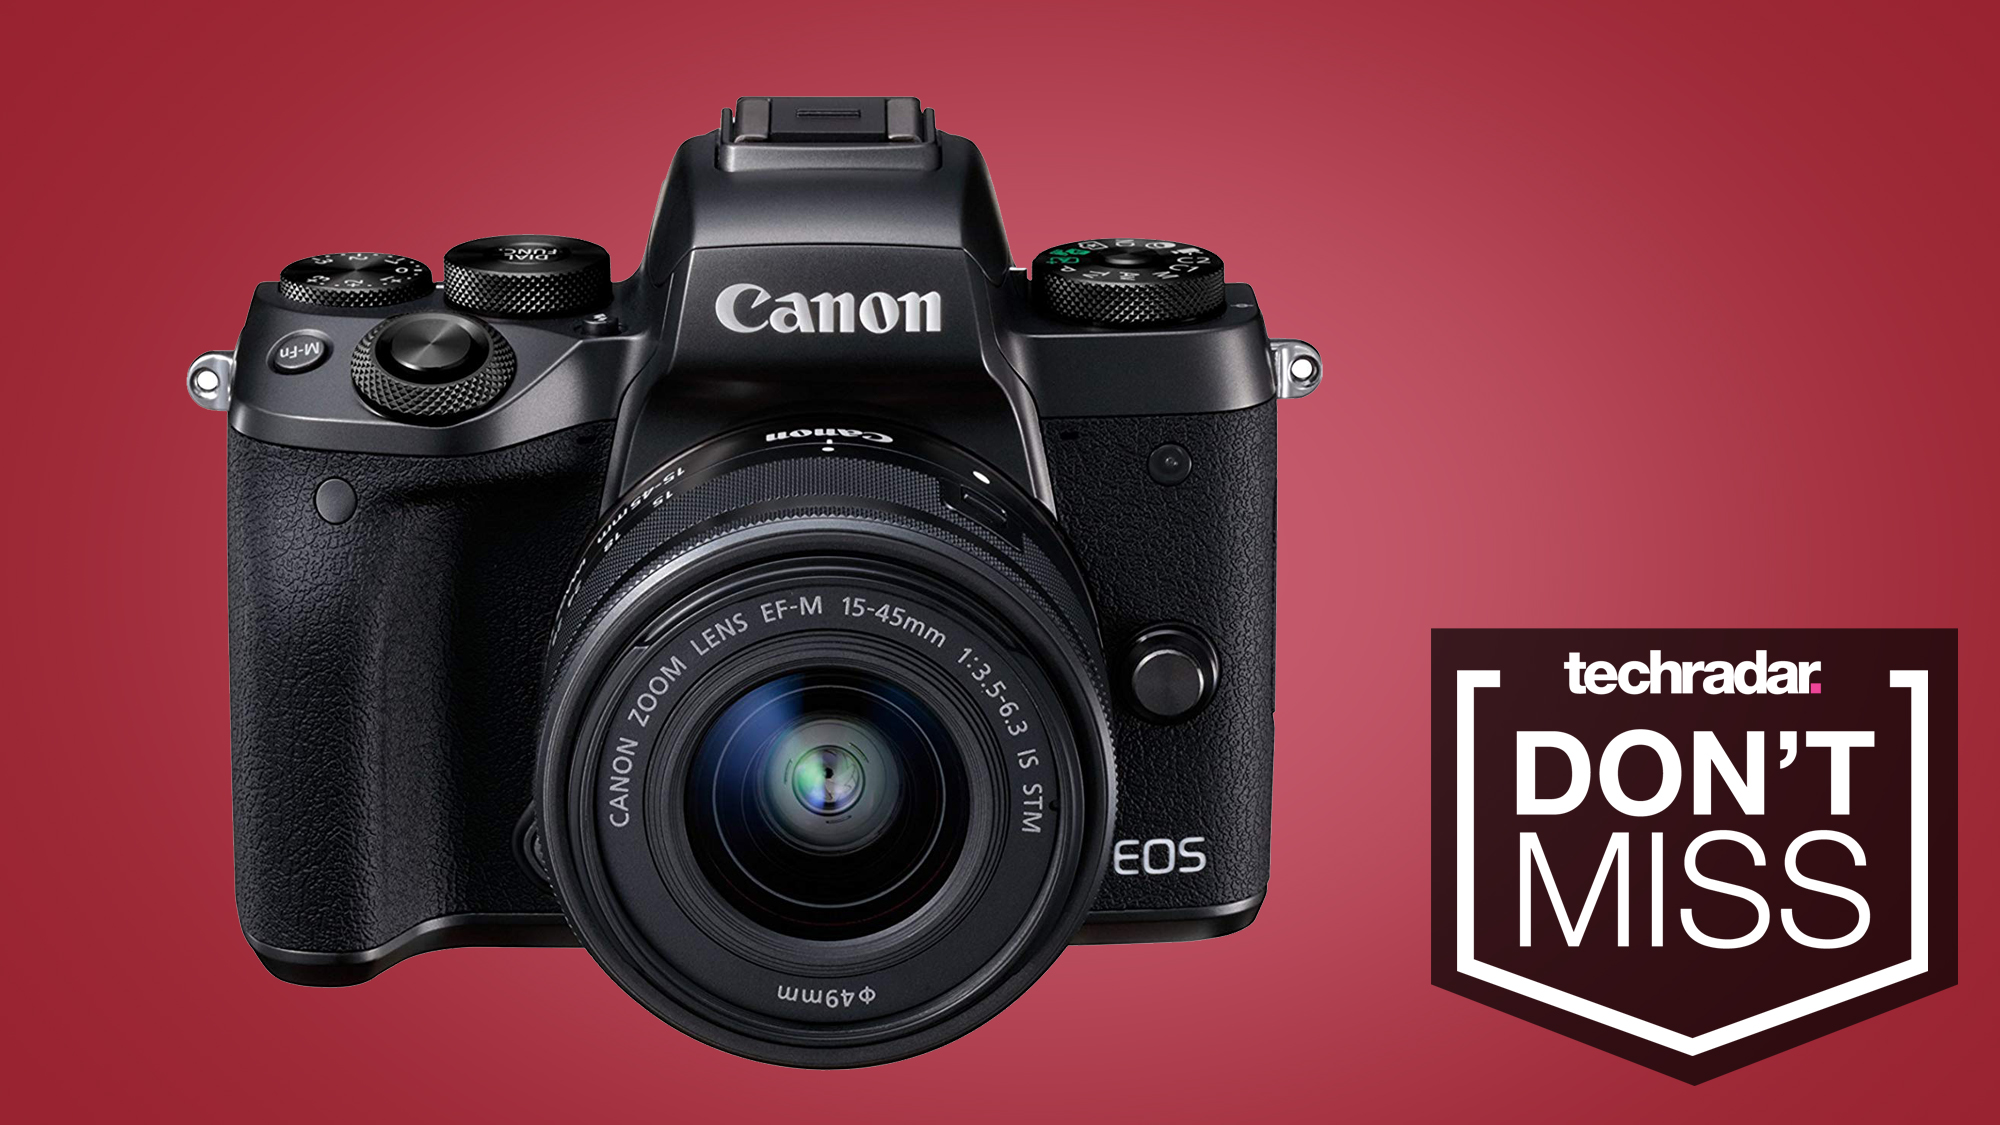 Canon EOS M5 hits lowest ever price in this 40% off deal